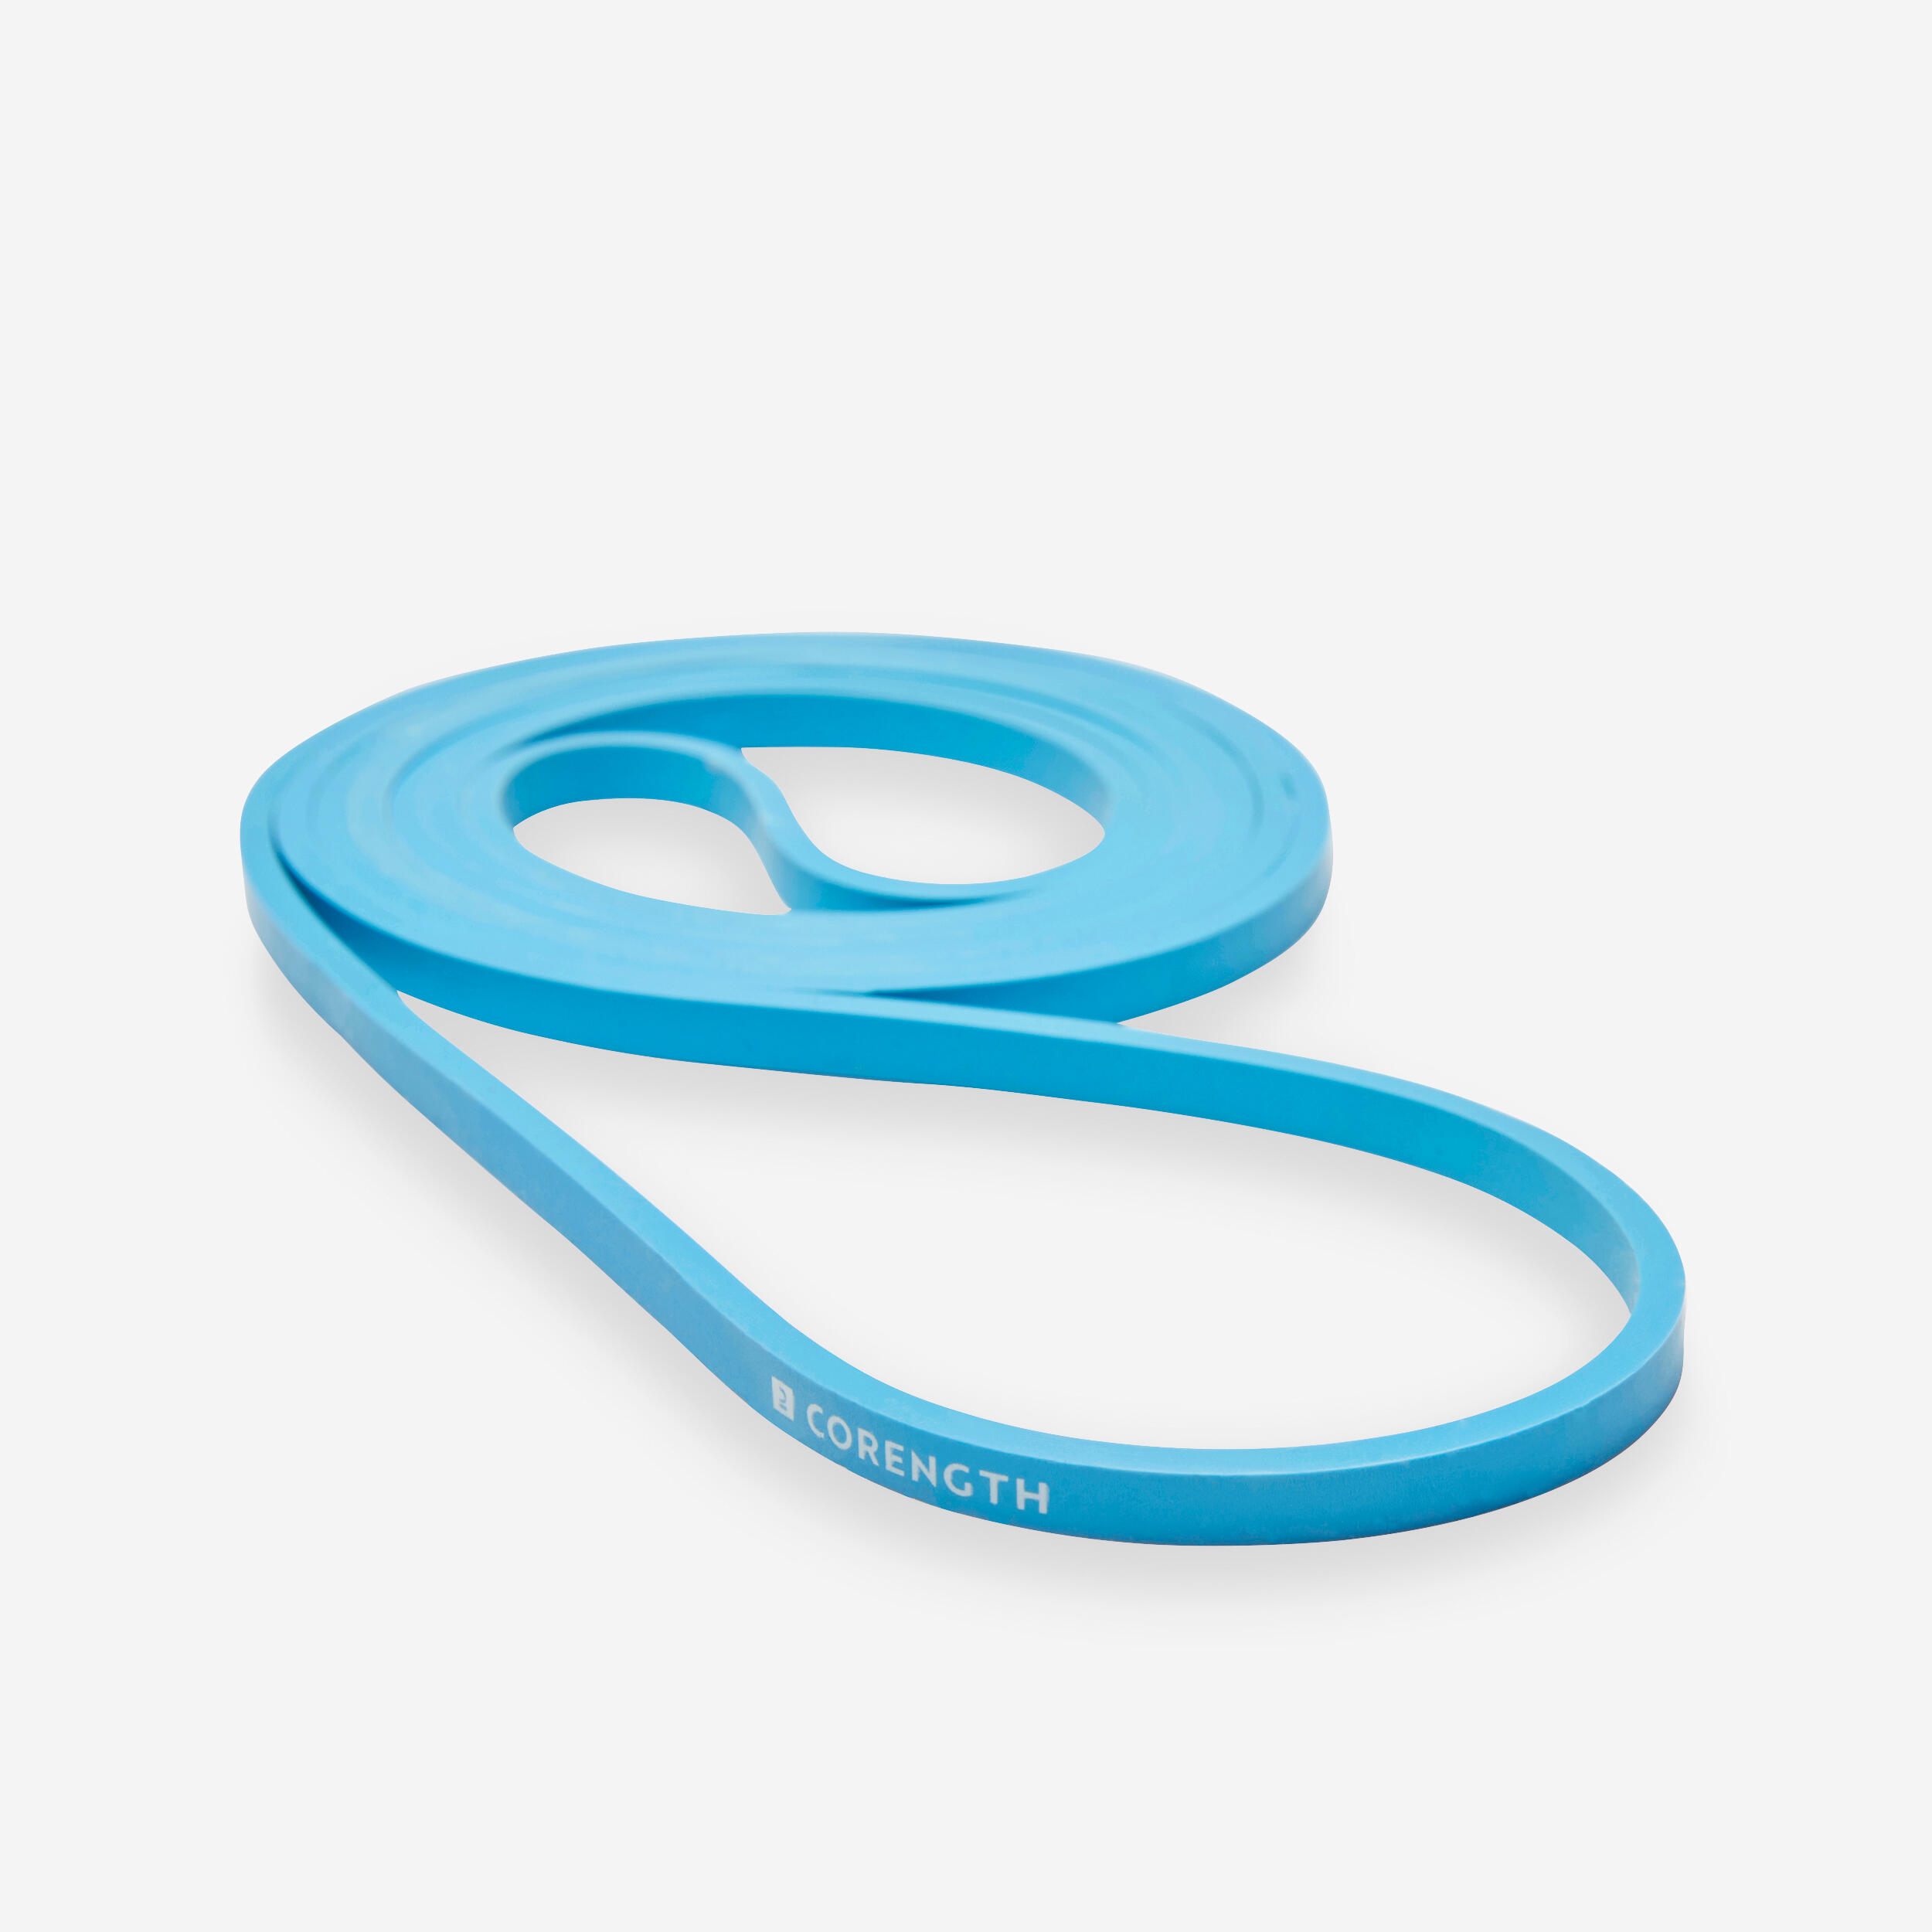 Weight Training Resistance Band 5 kg - Blue - CORENGTH